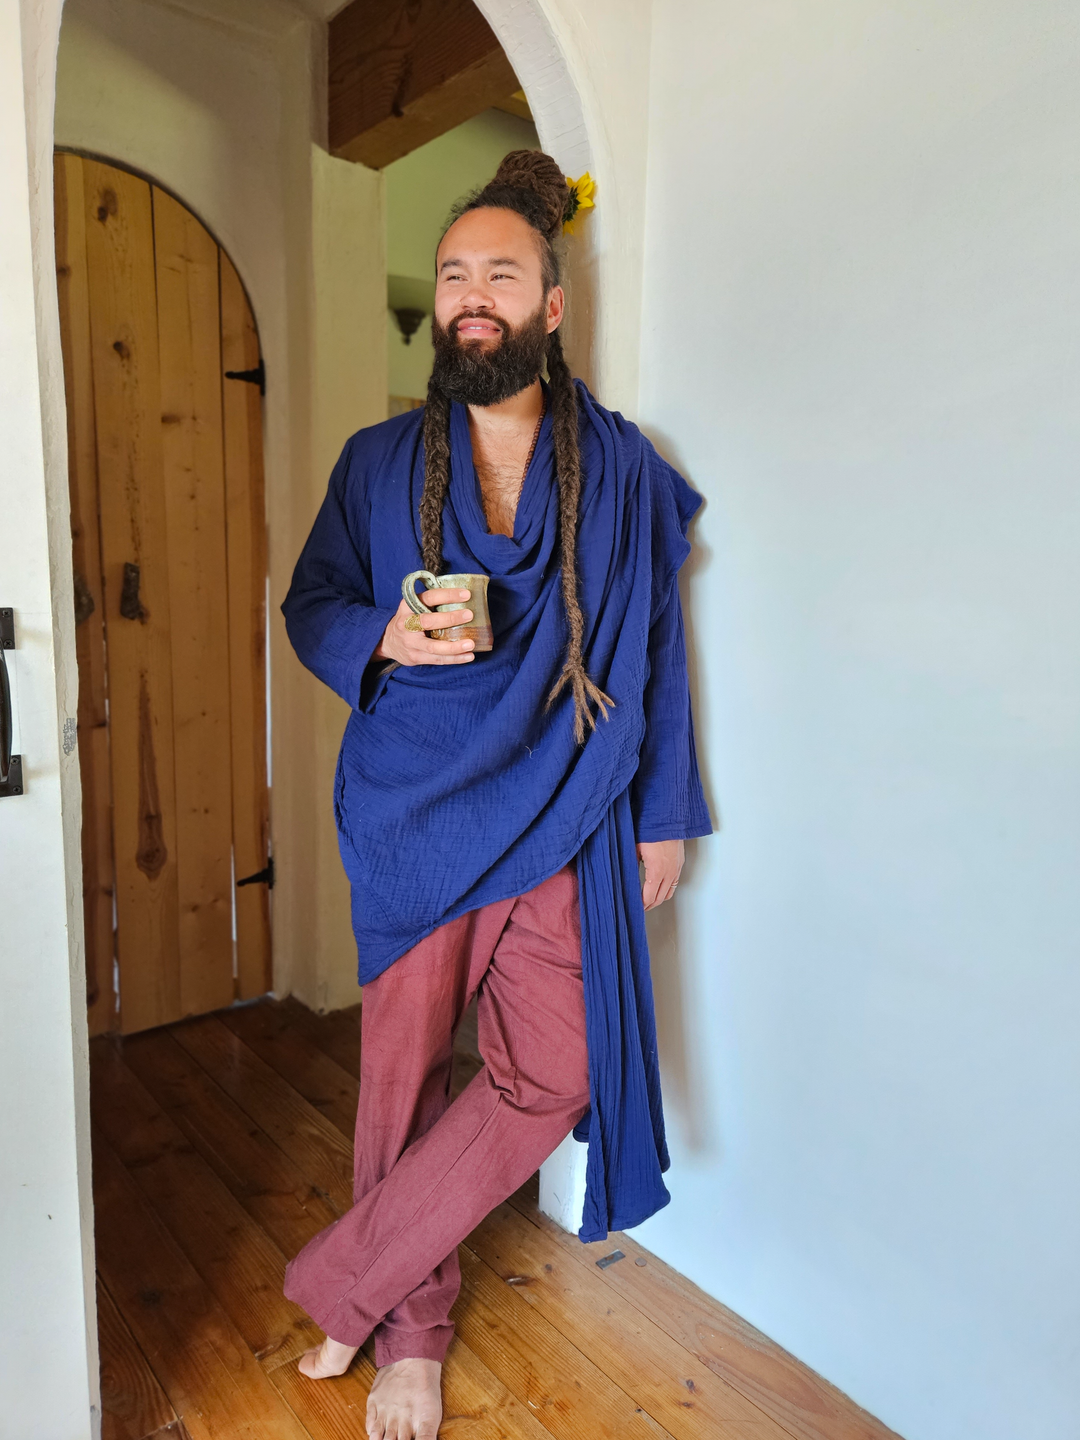 Man is wearing blue cloak wrapped around his upper body and pants on bottom.